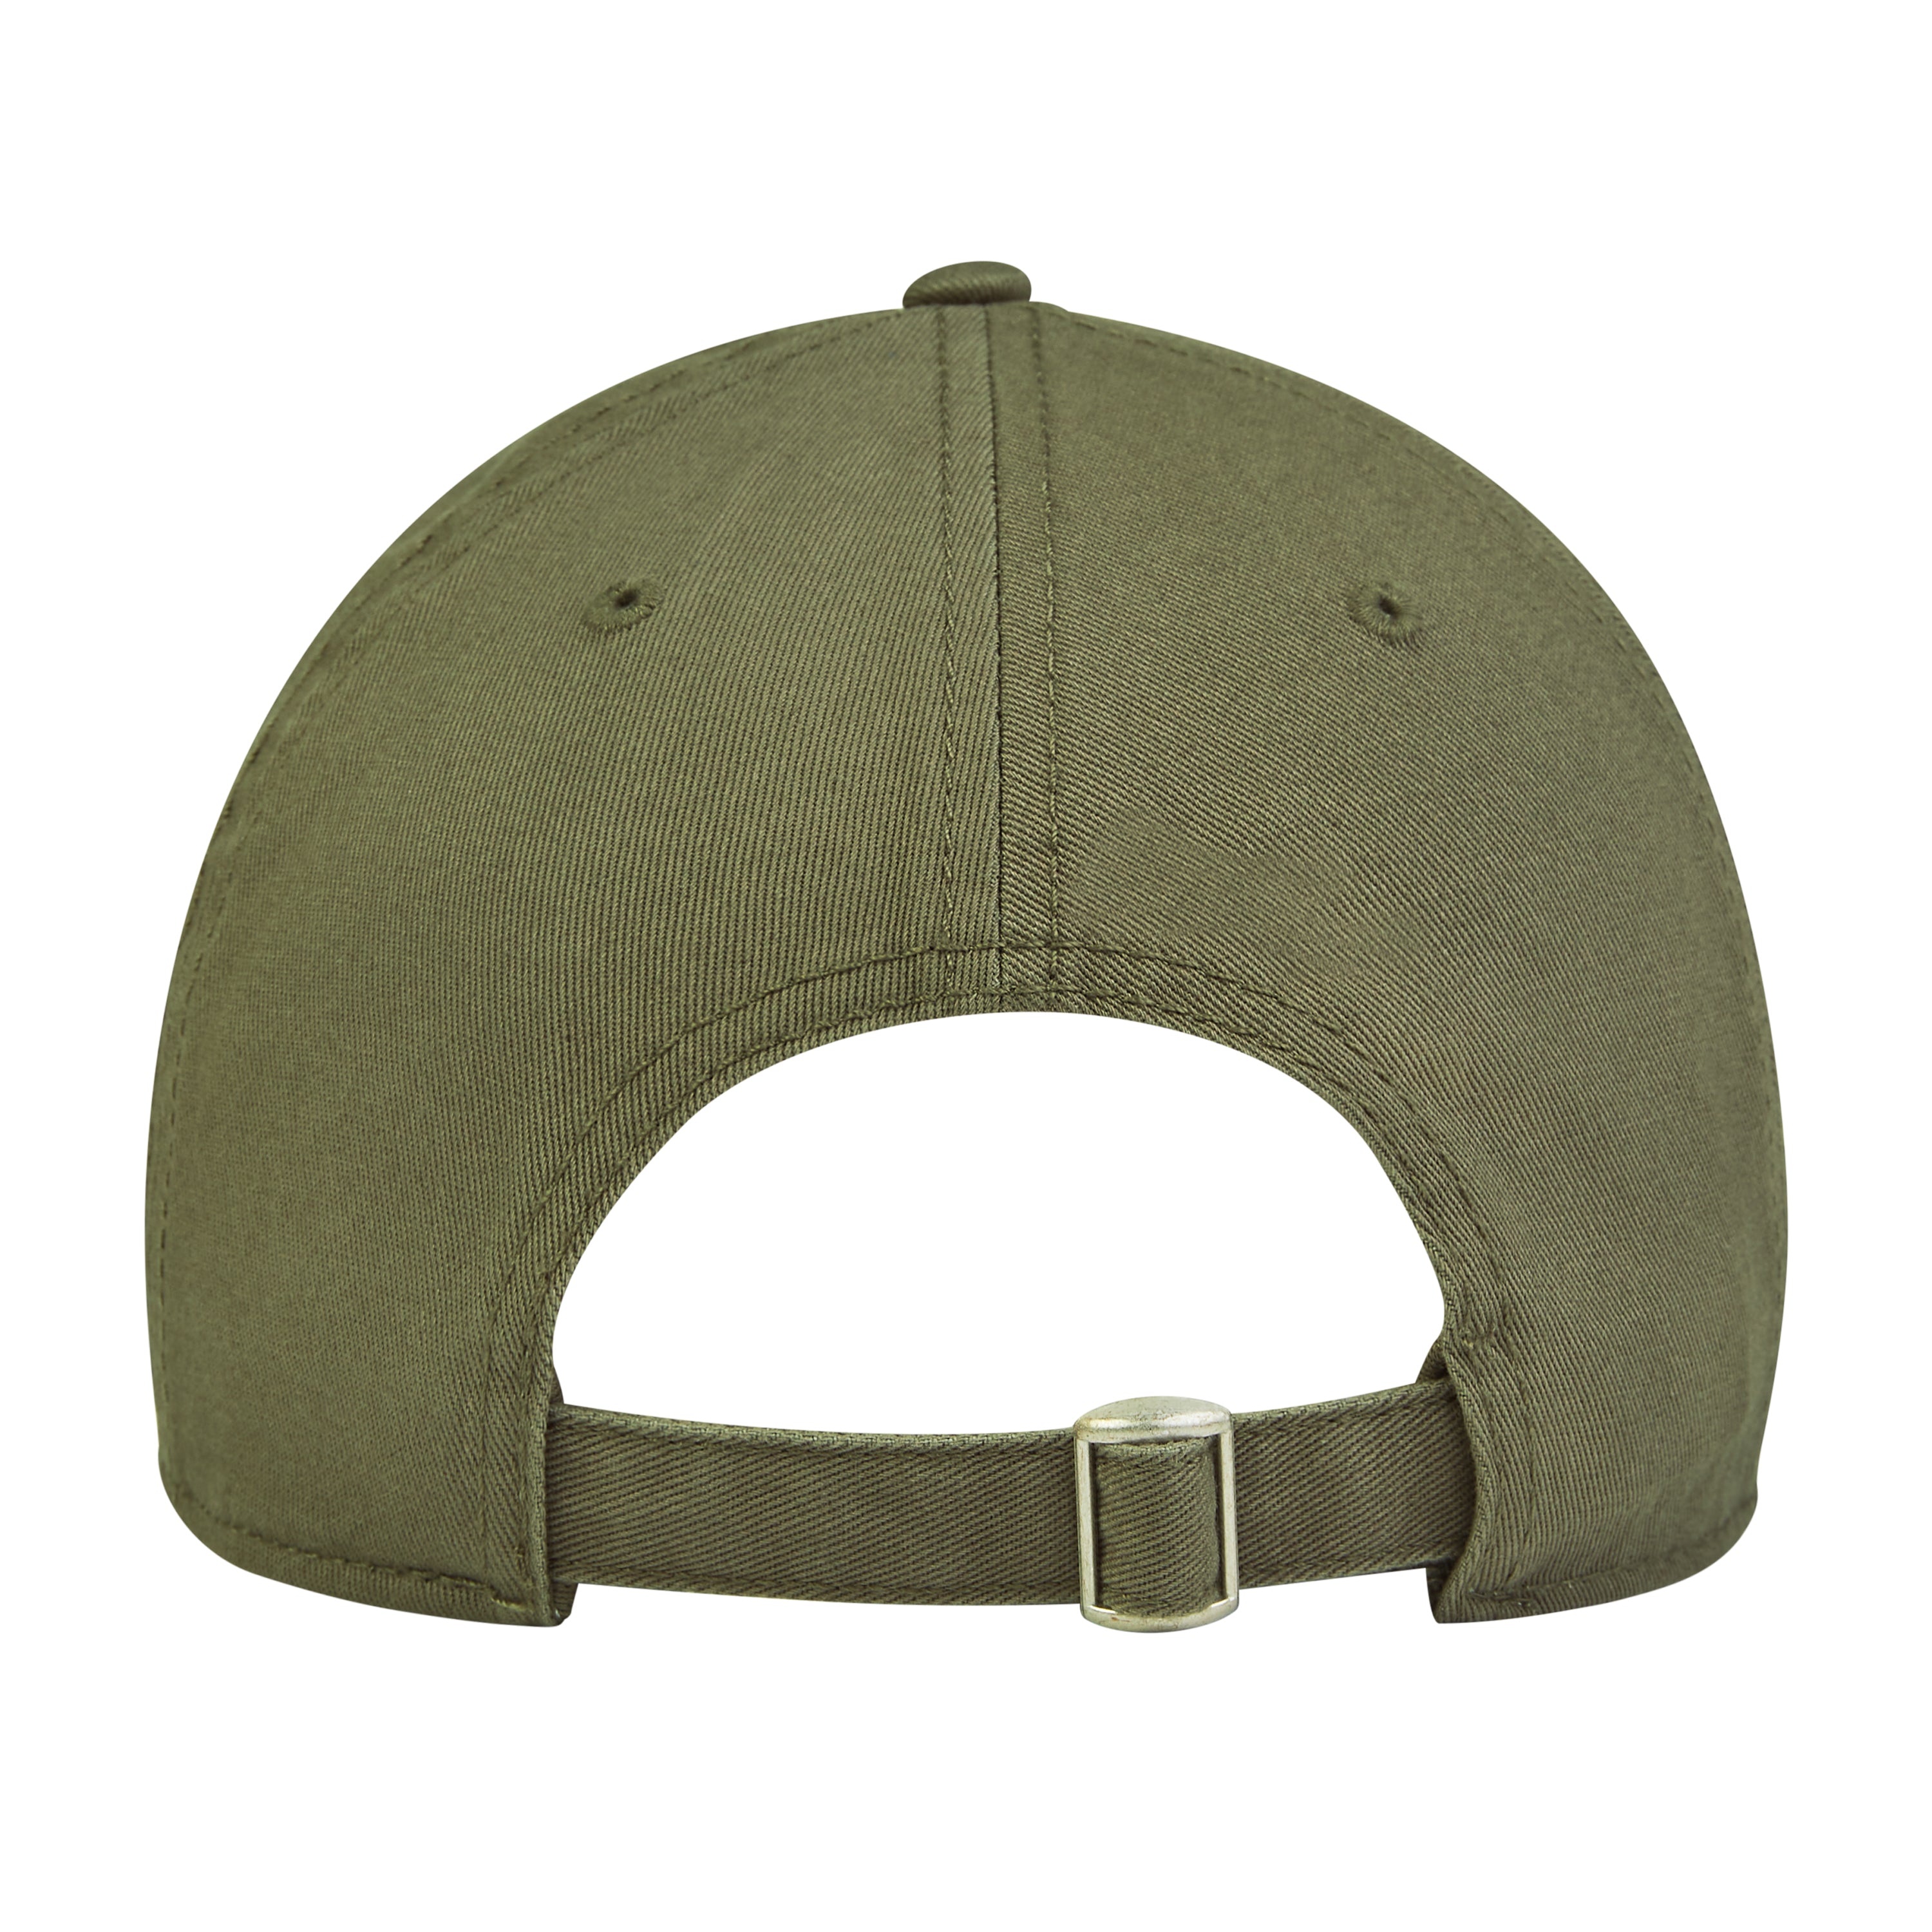 This is the back of the new standard 3d distressed 5 panel in khaki. It's a large image of the rear of the hat showing the buckle and the strap on a white background